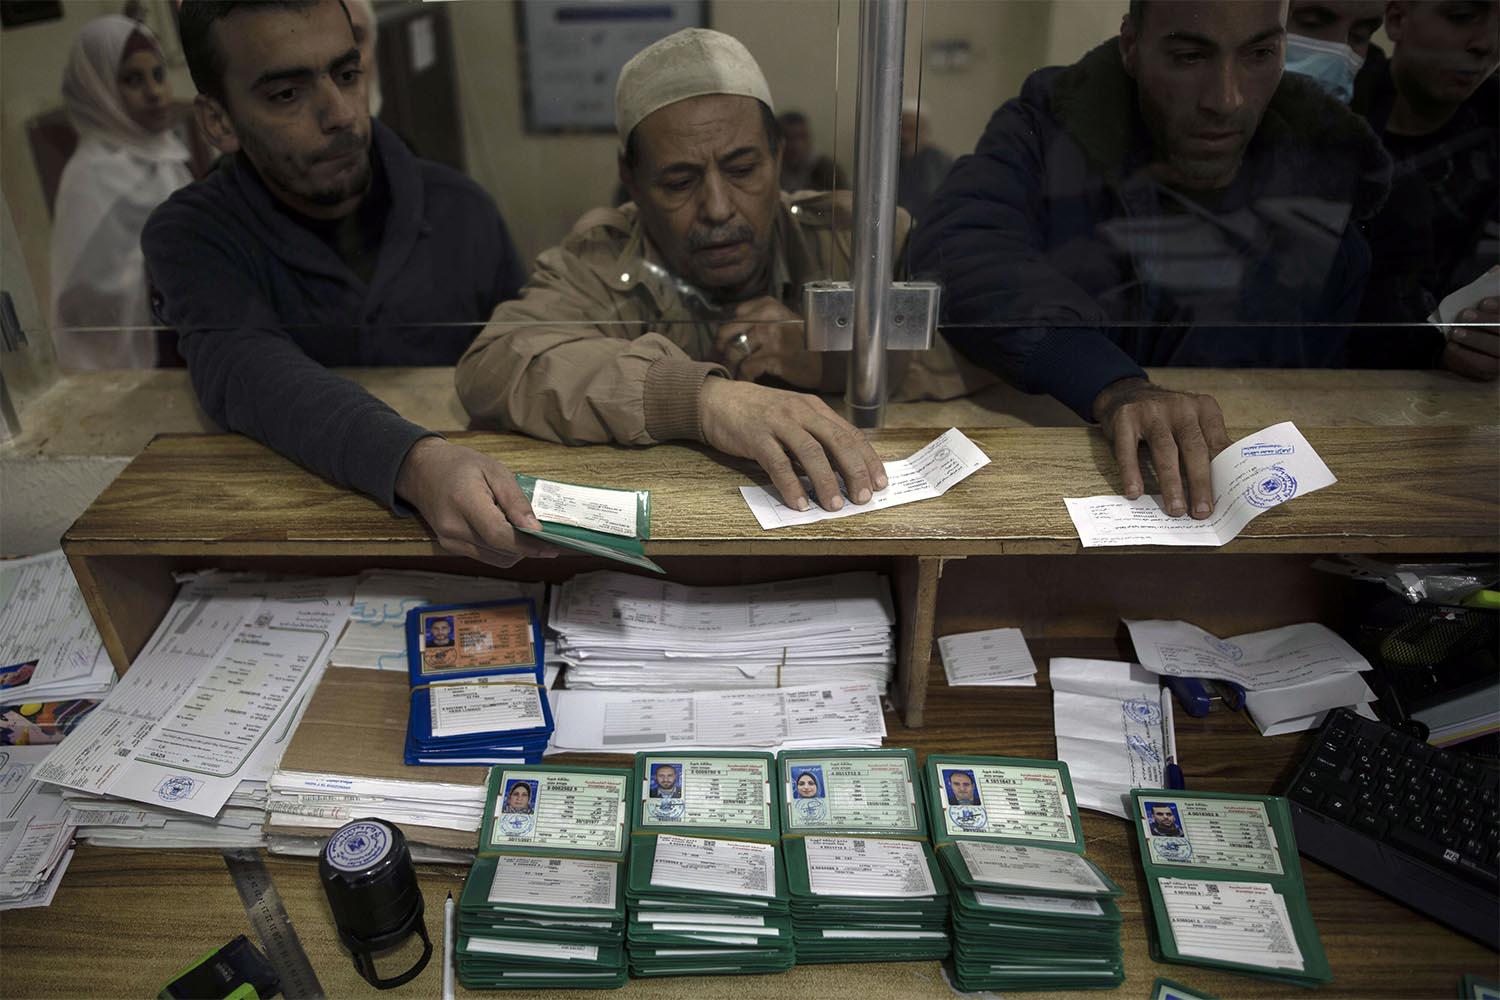 An estimated tens of thousands of Palestinians do not have legal residency